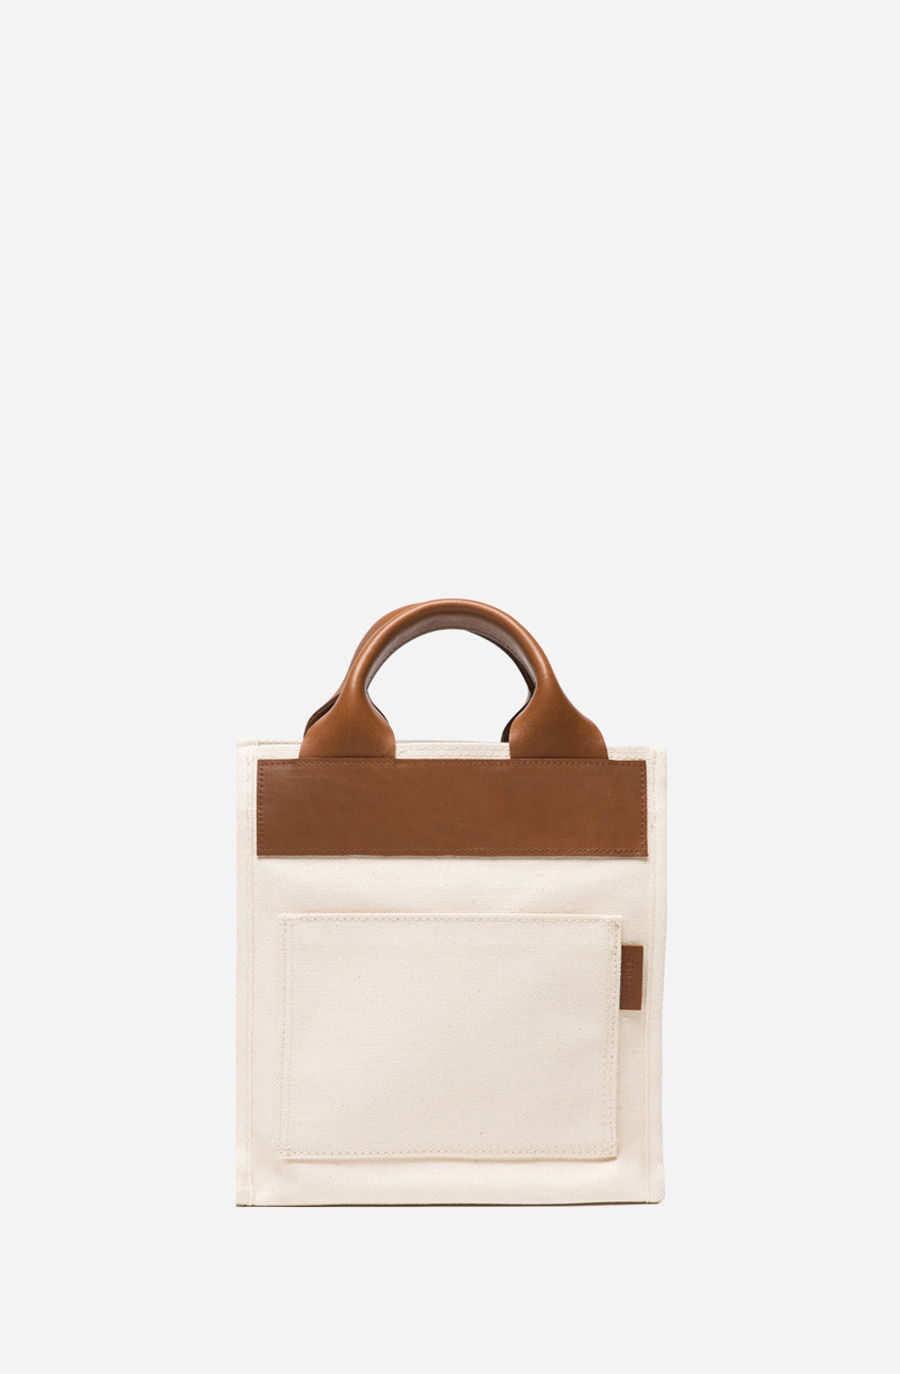 DAY BAG (small size)